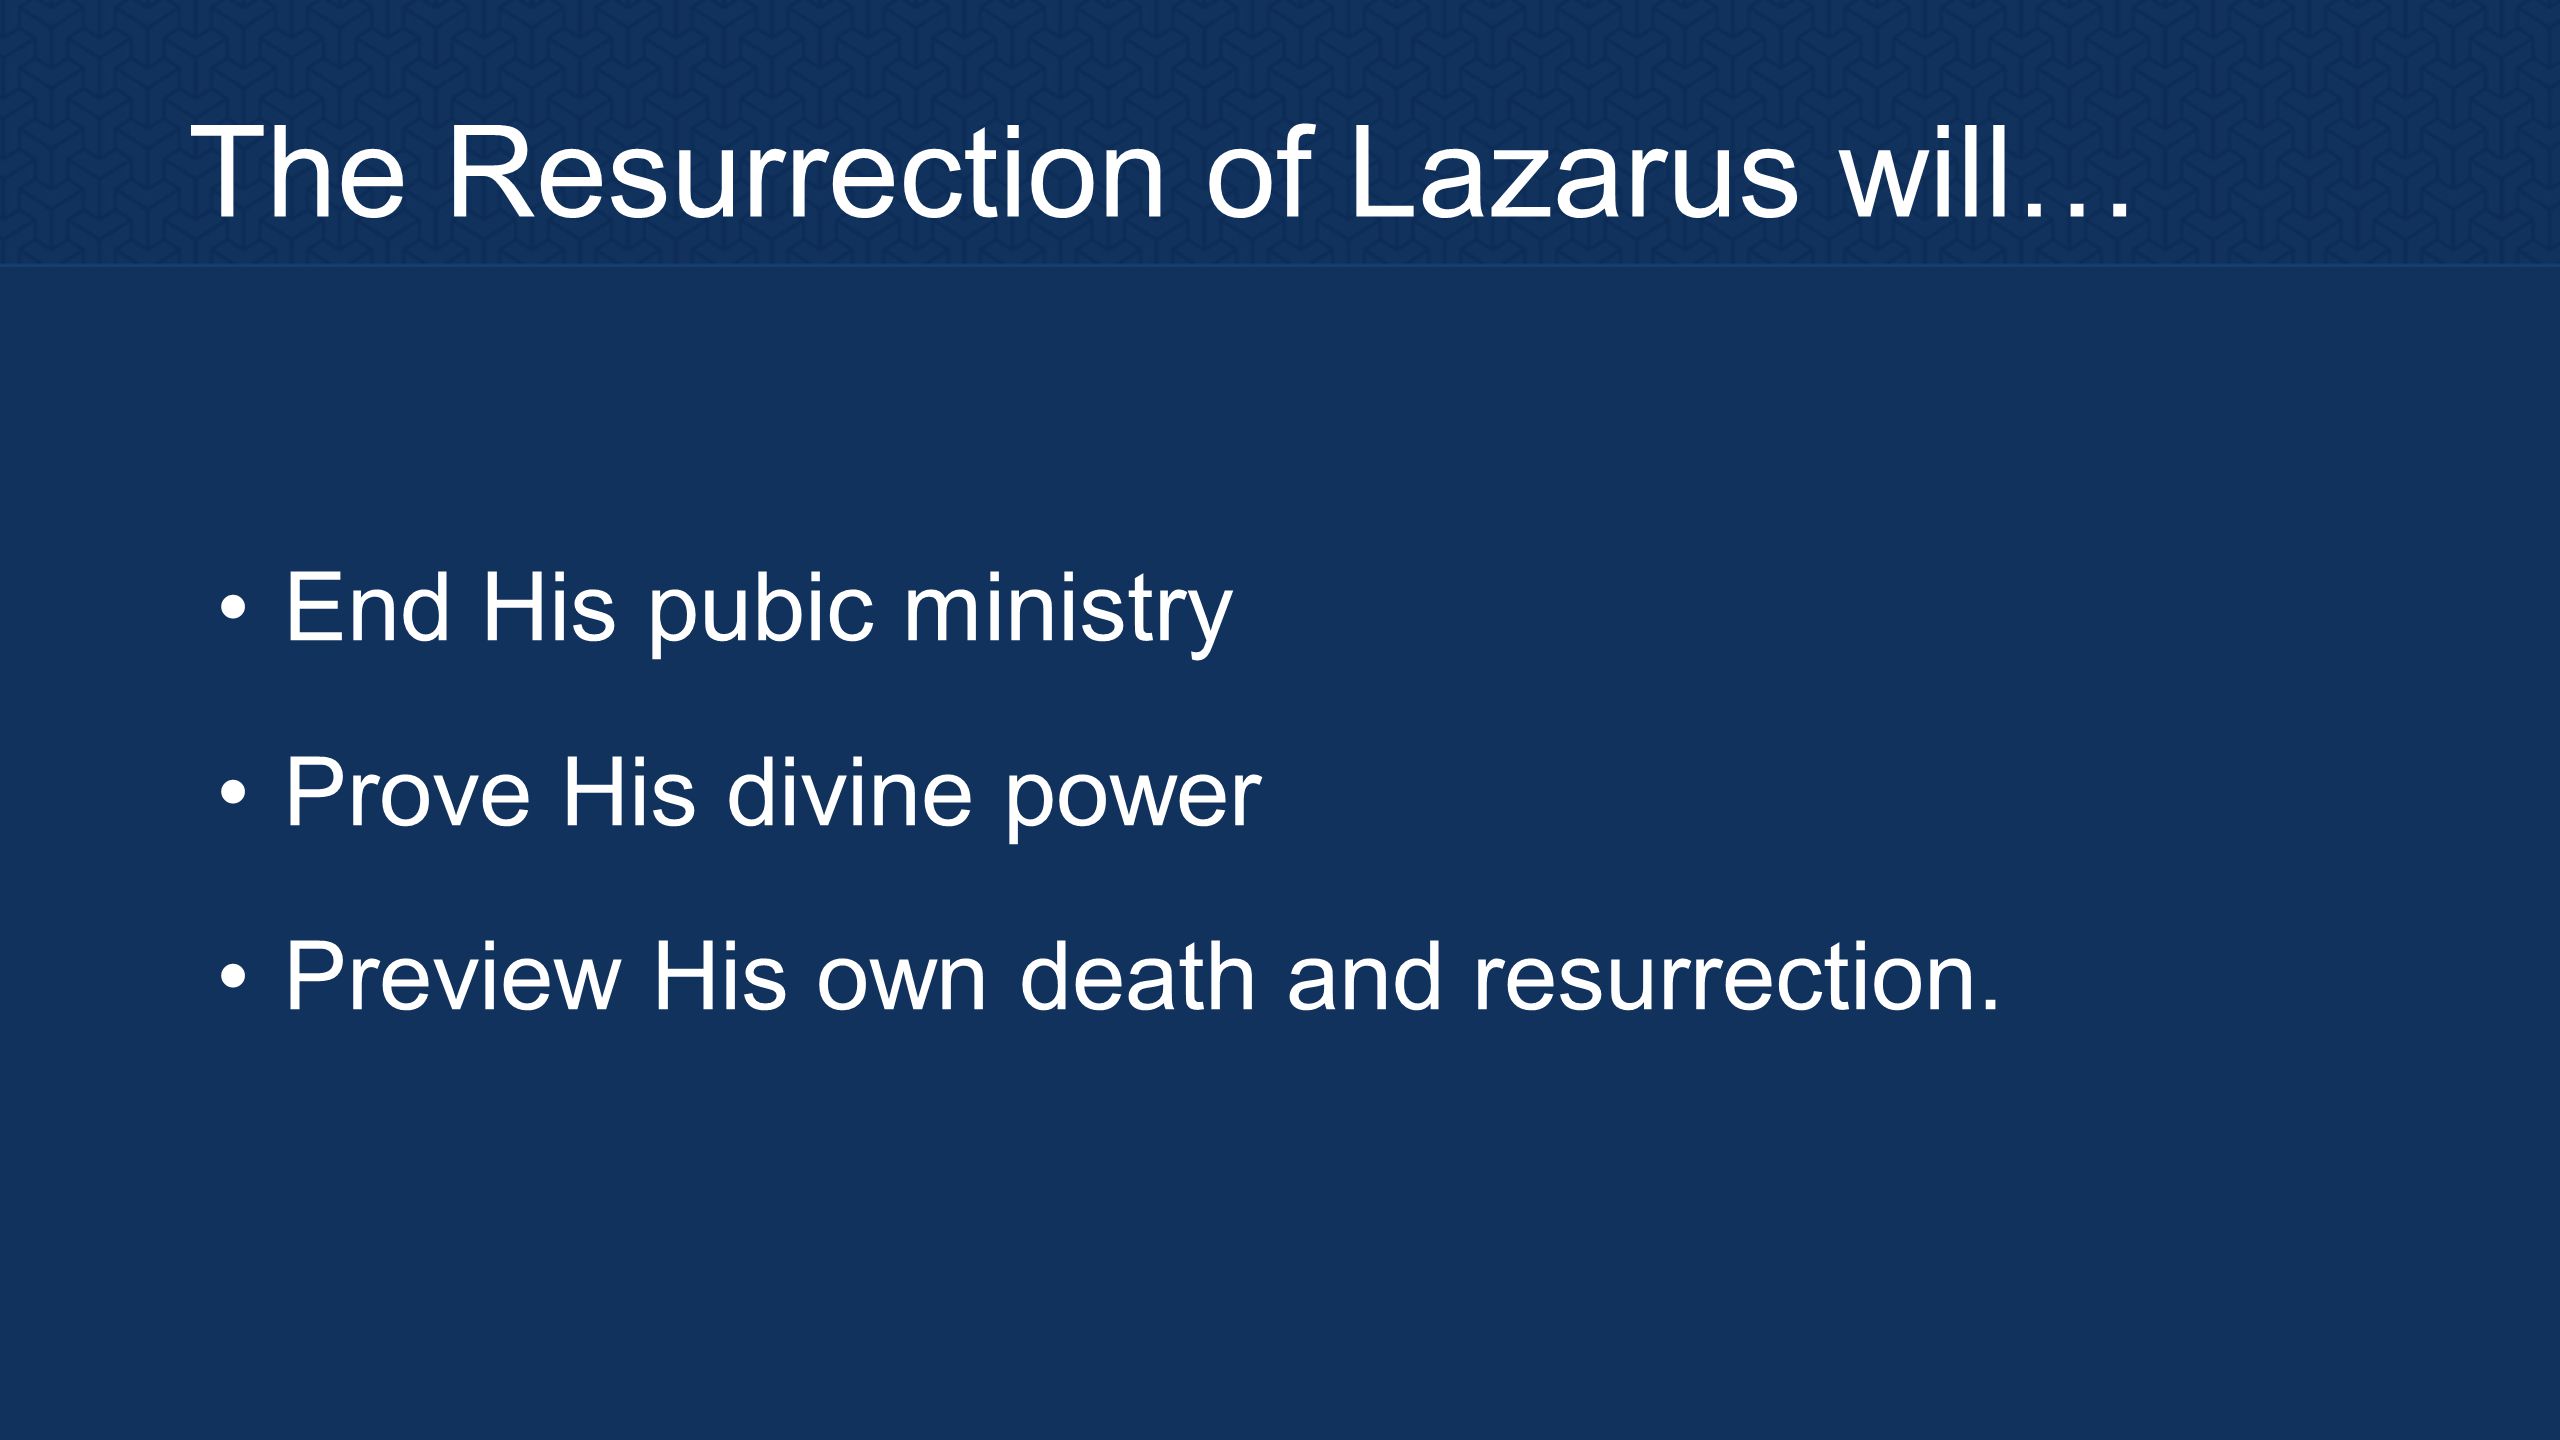 The Resurrection of Lazarus will… End His pubic ministry Prove His divine power Preview His own death and resurrection.